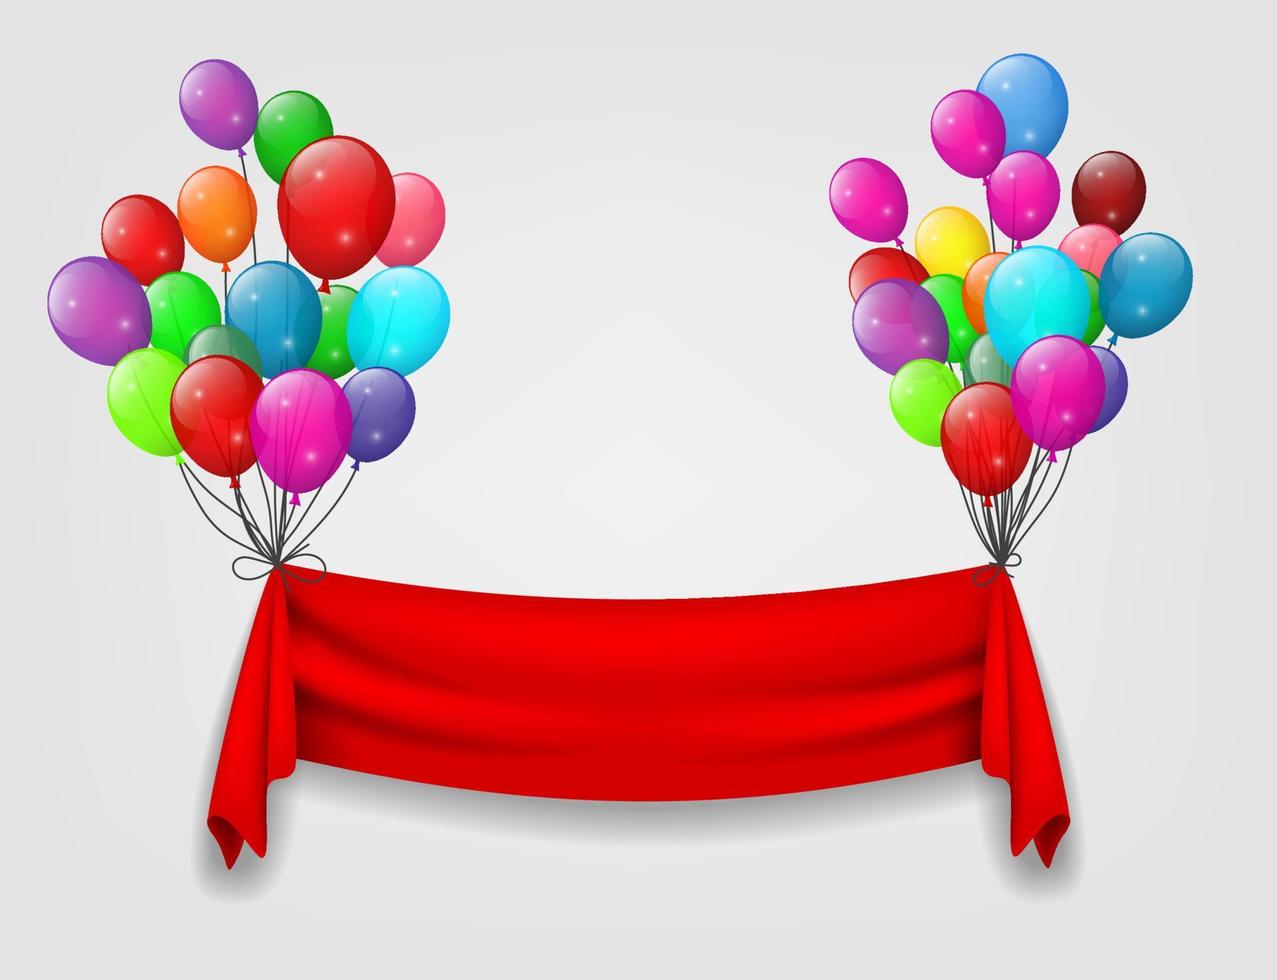 Red Ribbon Flying with Balloons, Vector Illustration